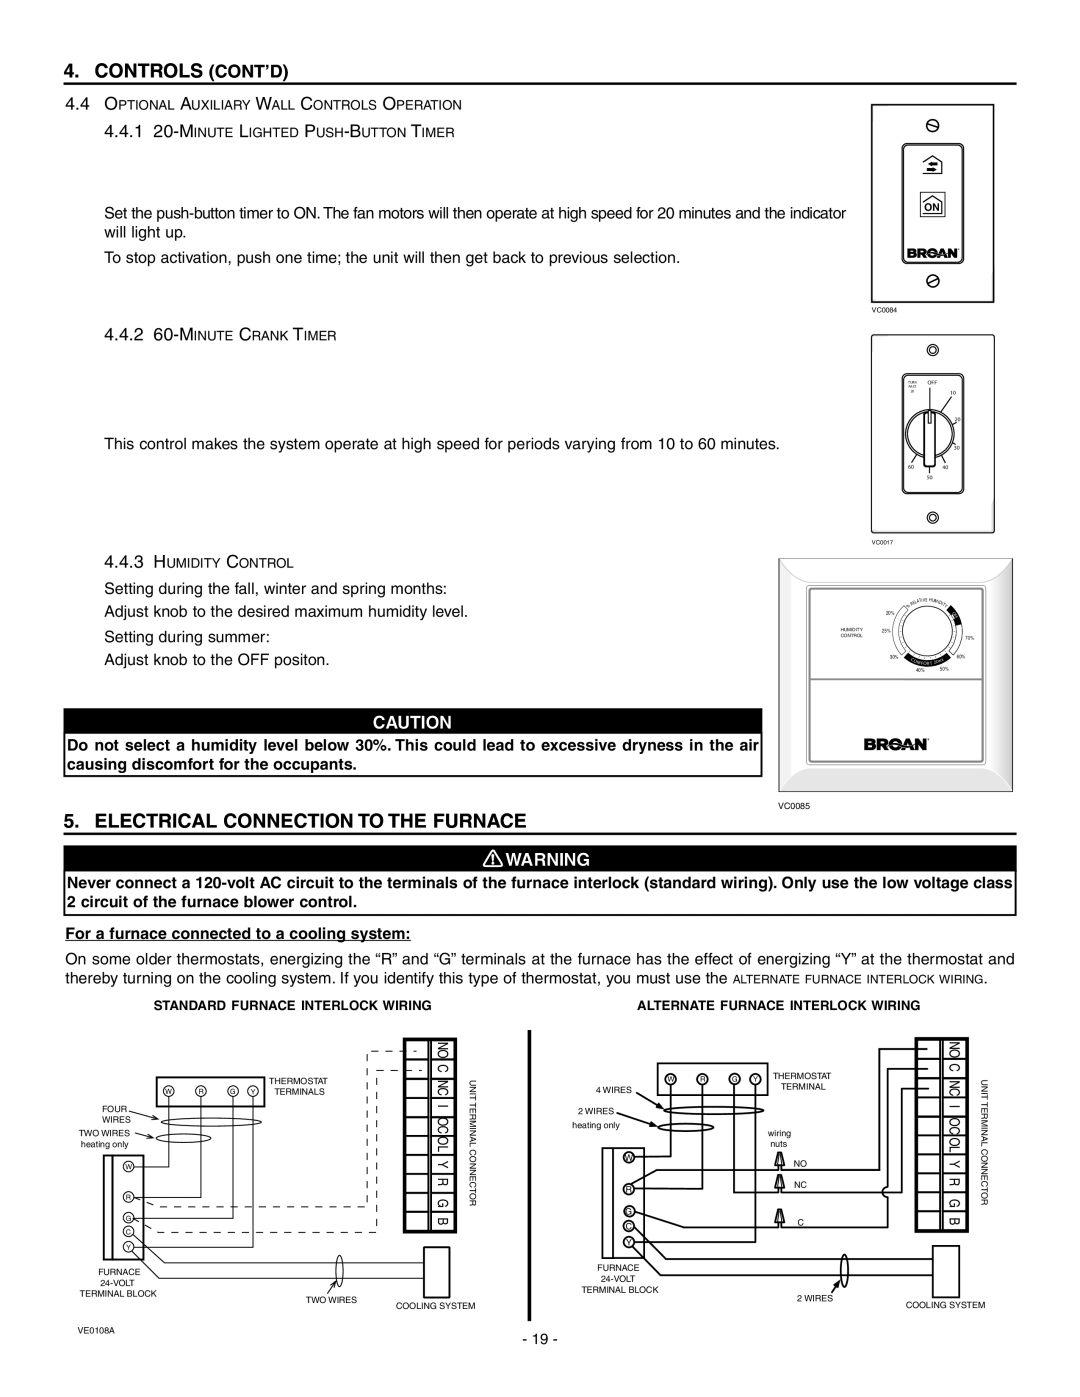 Broan ERV90HCT installation instructions Controls Cont’D, Electrical Connection To The Furnace, 0! WARNING 